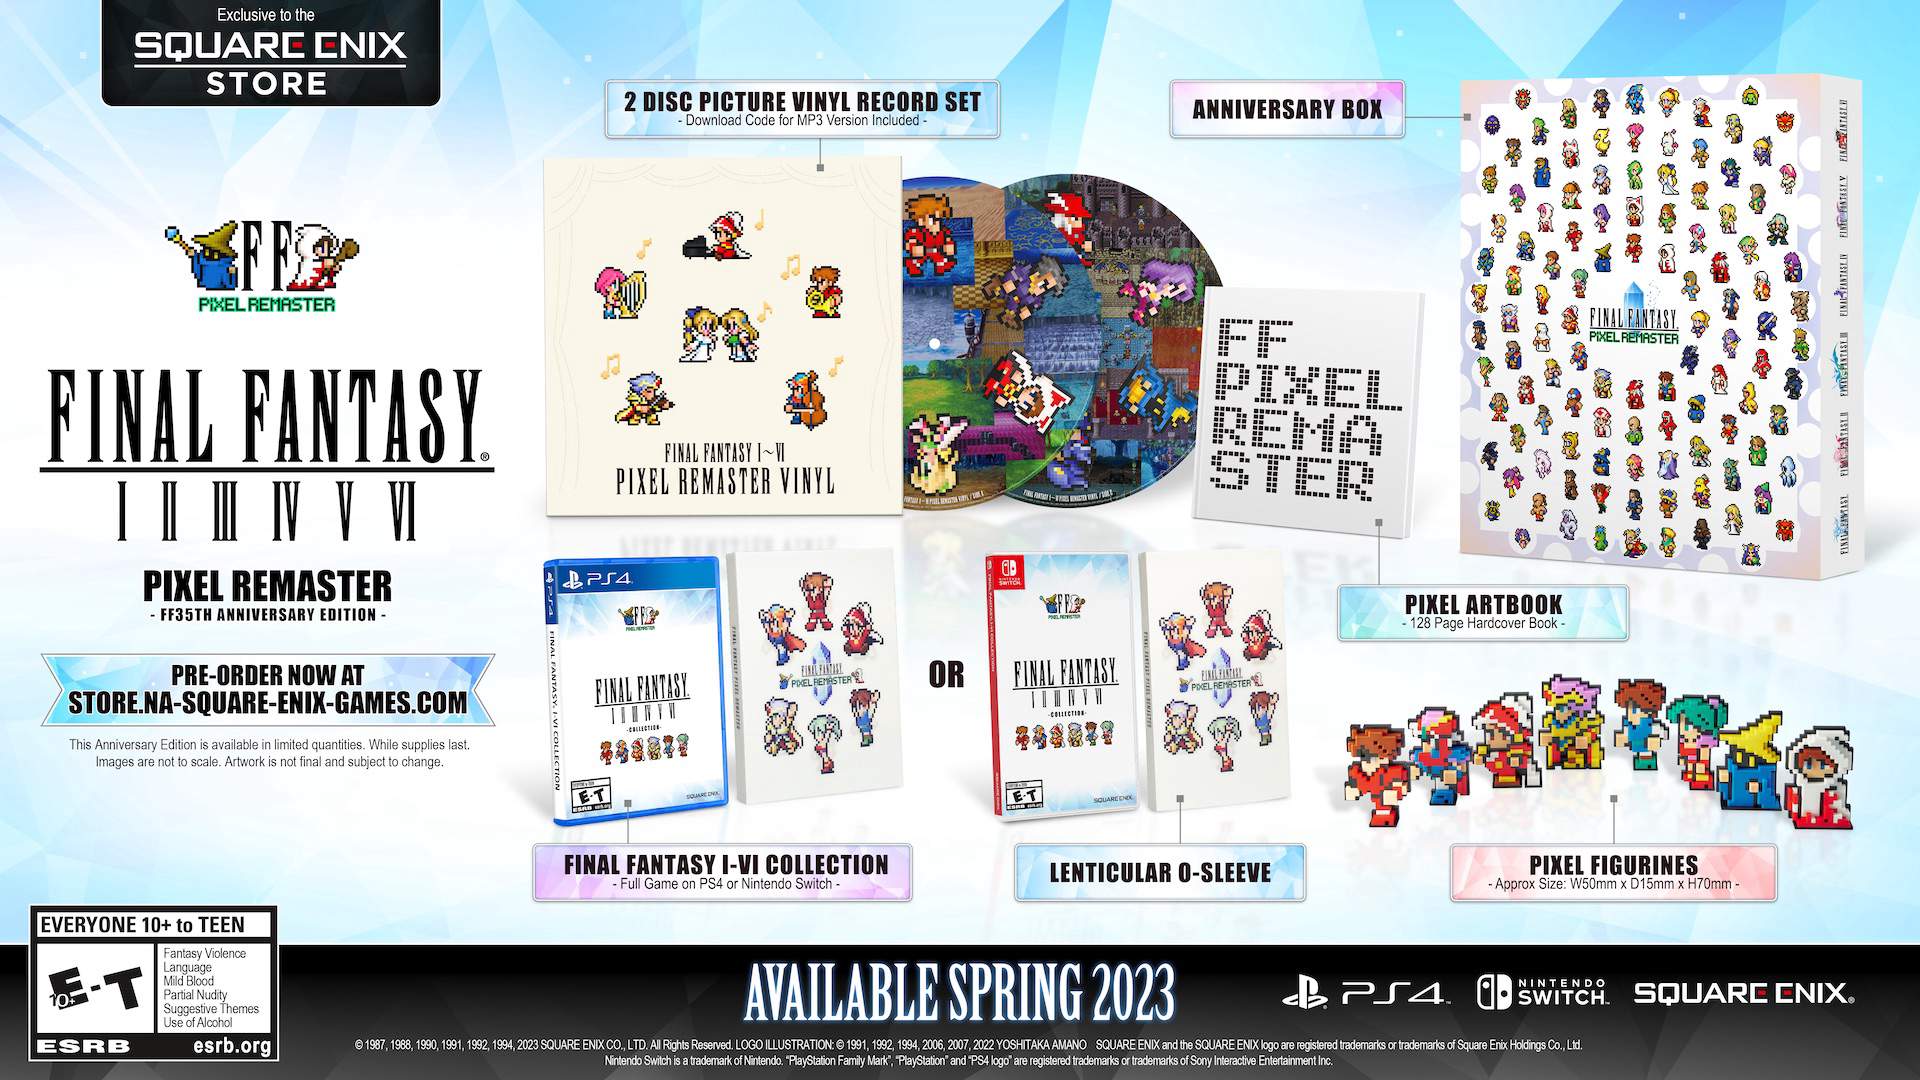 Final Fantasy Pixel Remaster officially announced for PS4 and Nintendo Switch